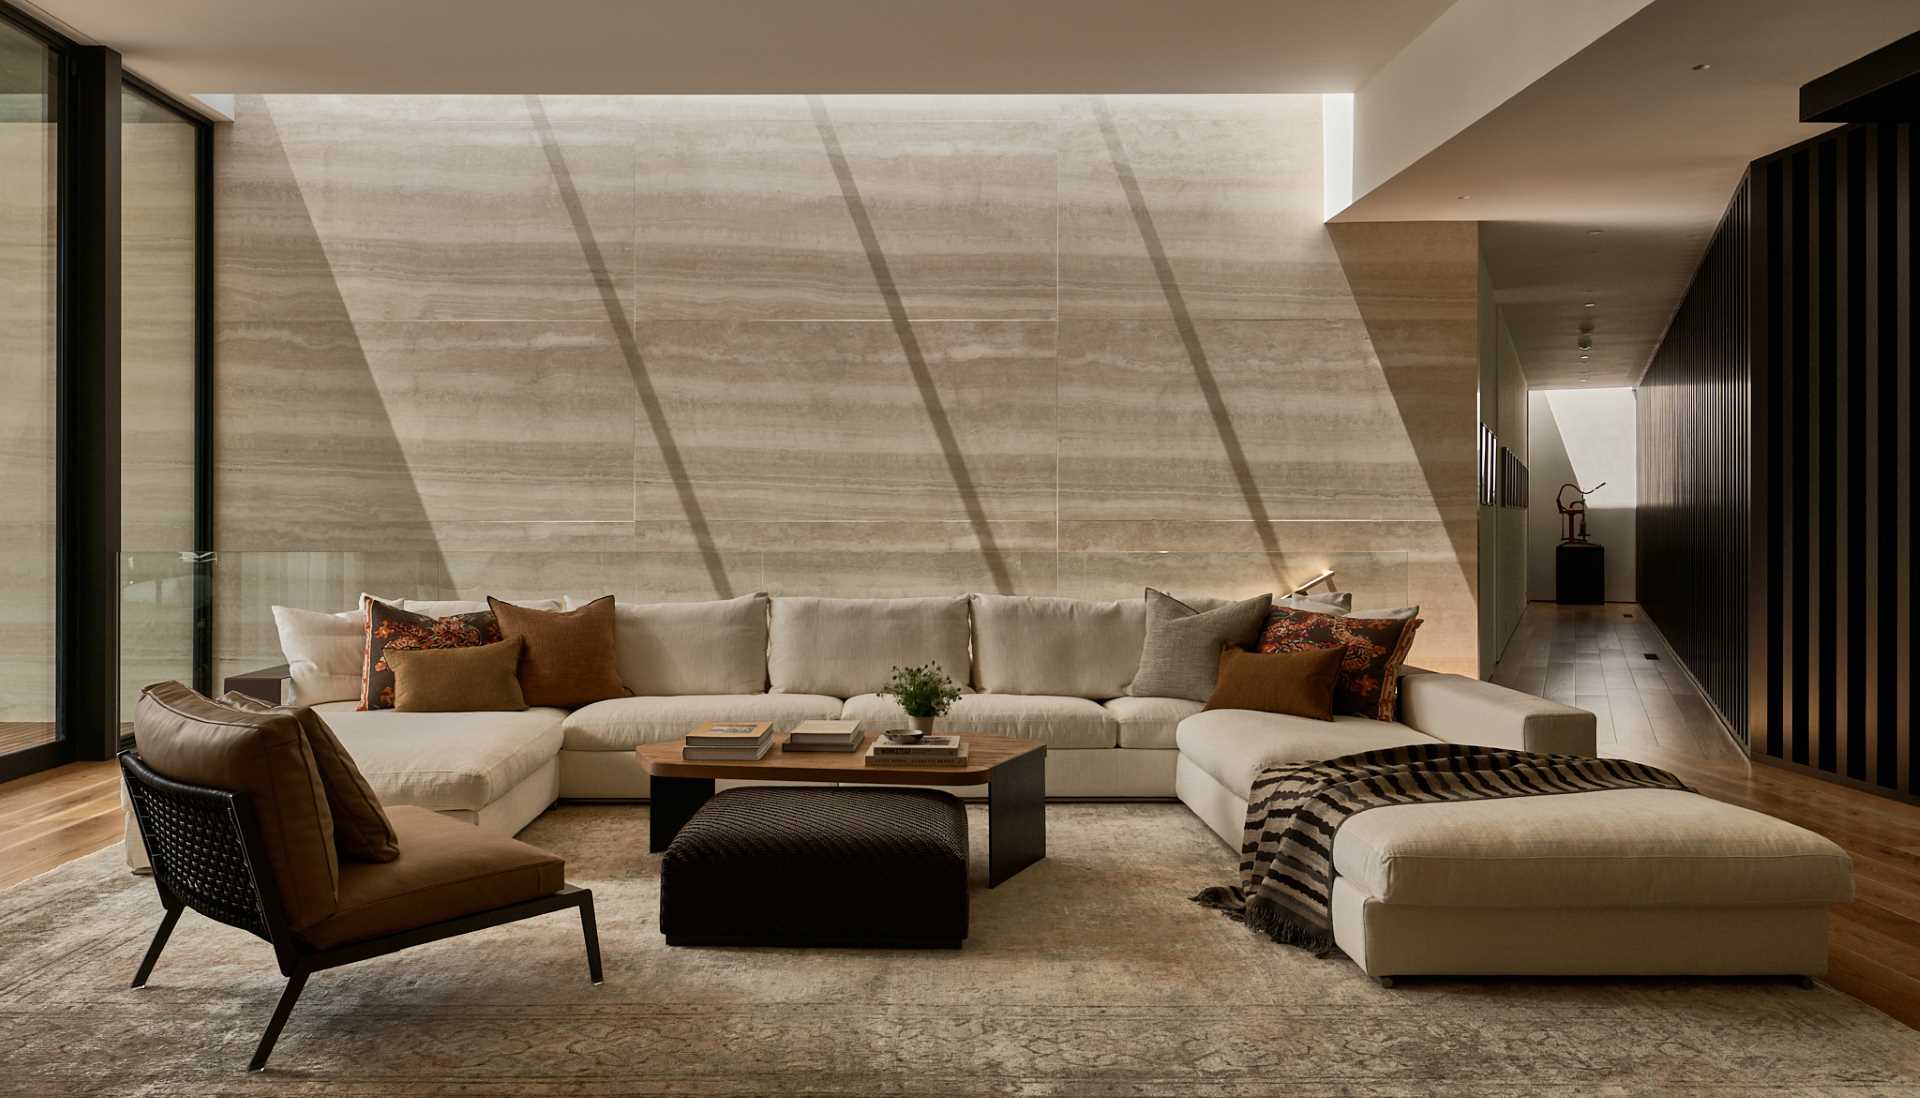 In this living room, a large couch provides ample seating, while the travertine wall adds a natural element to the ،e.